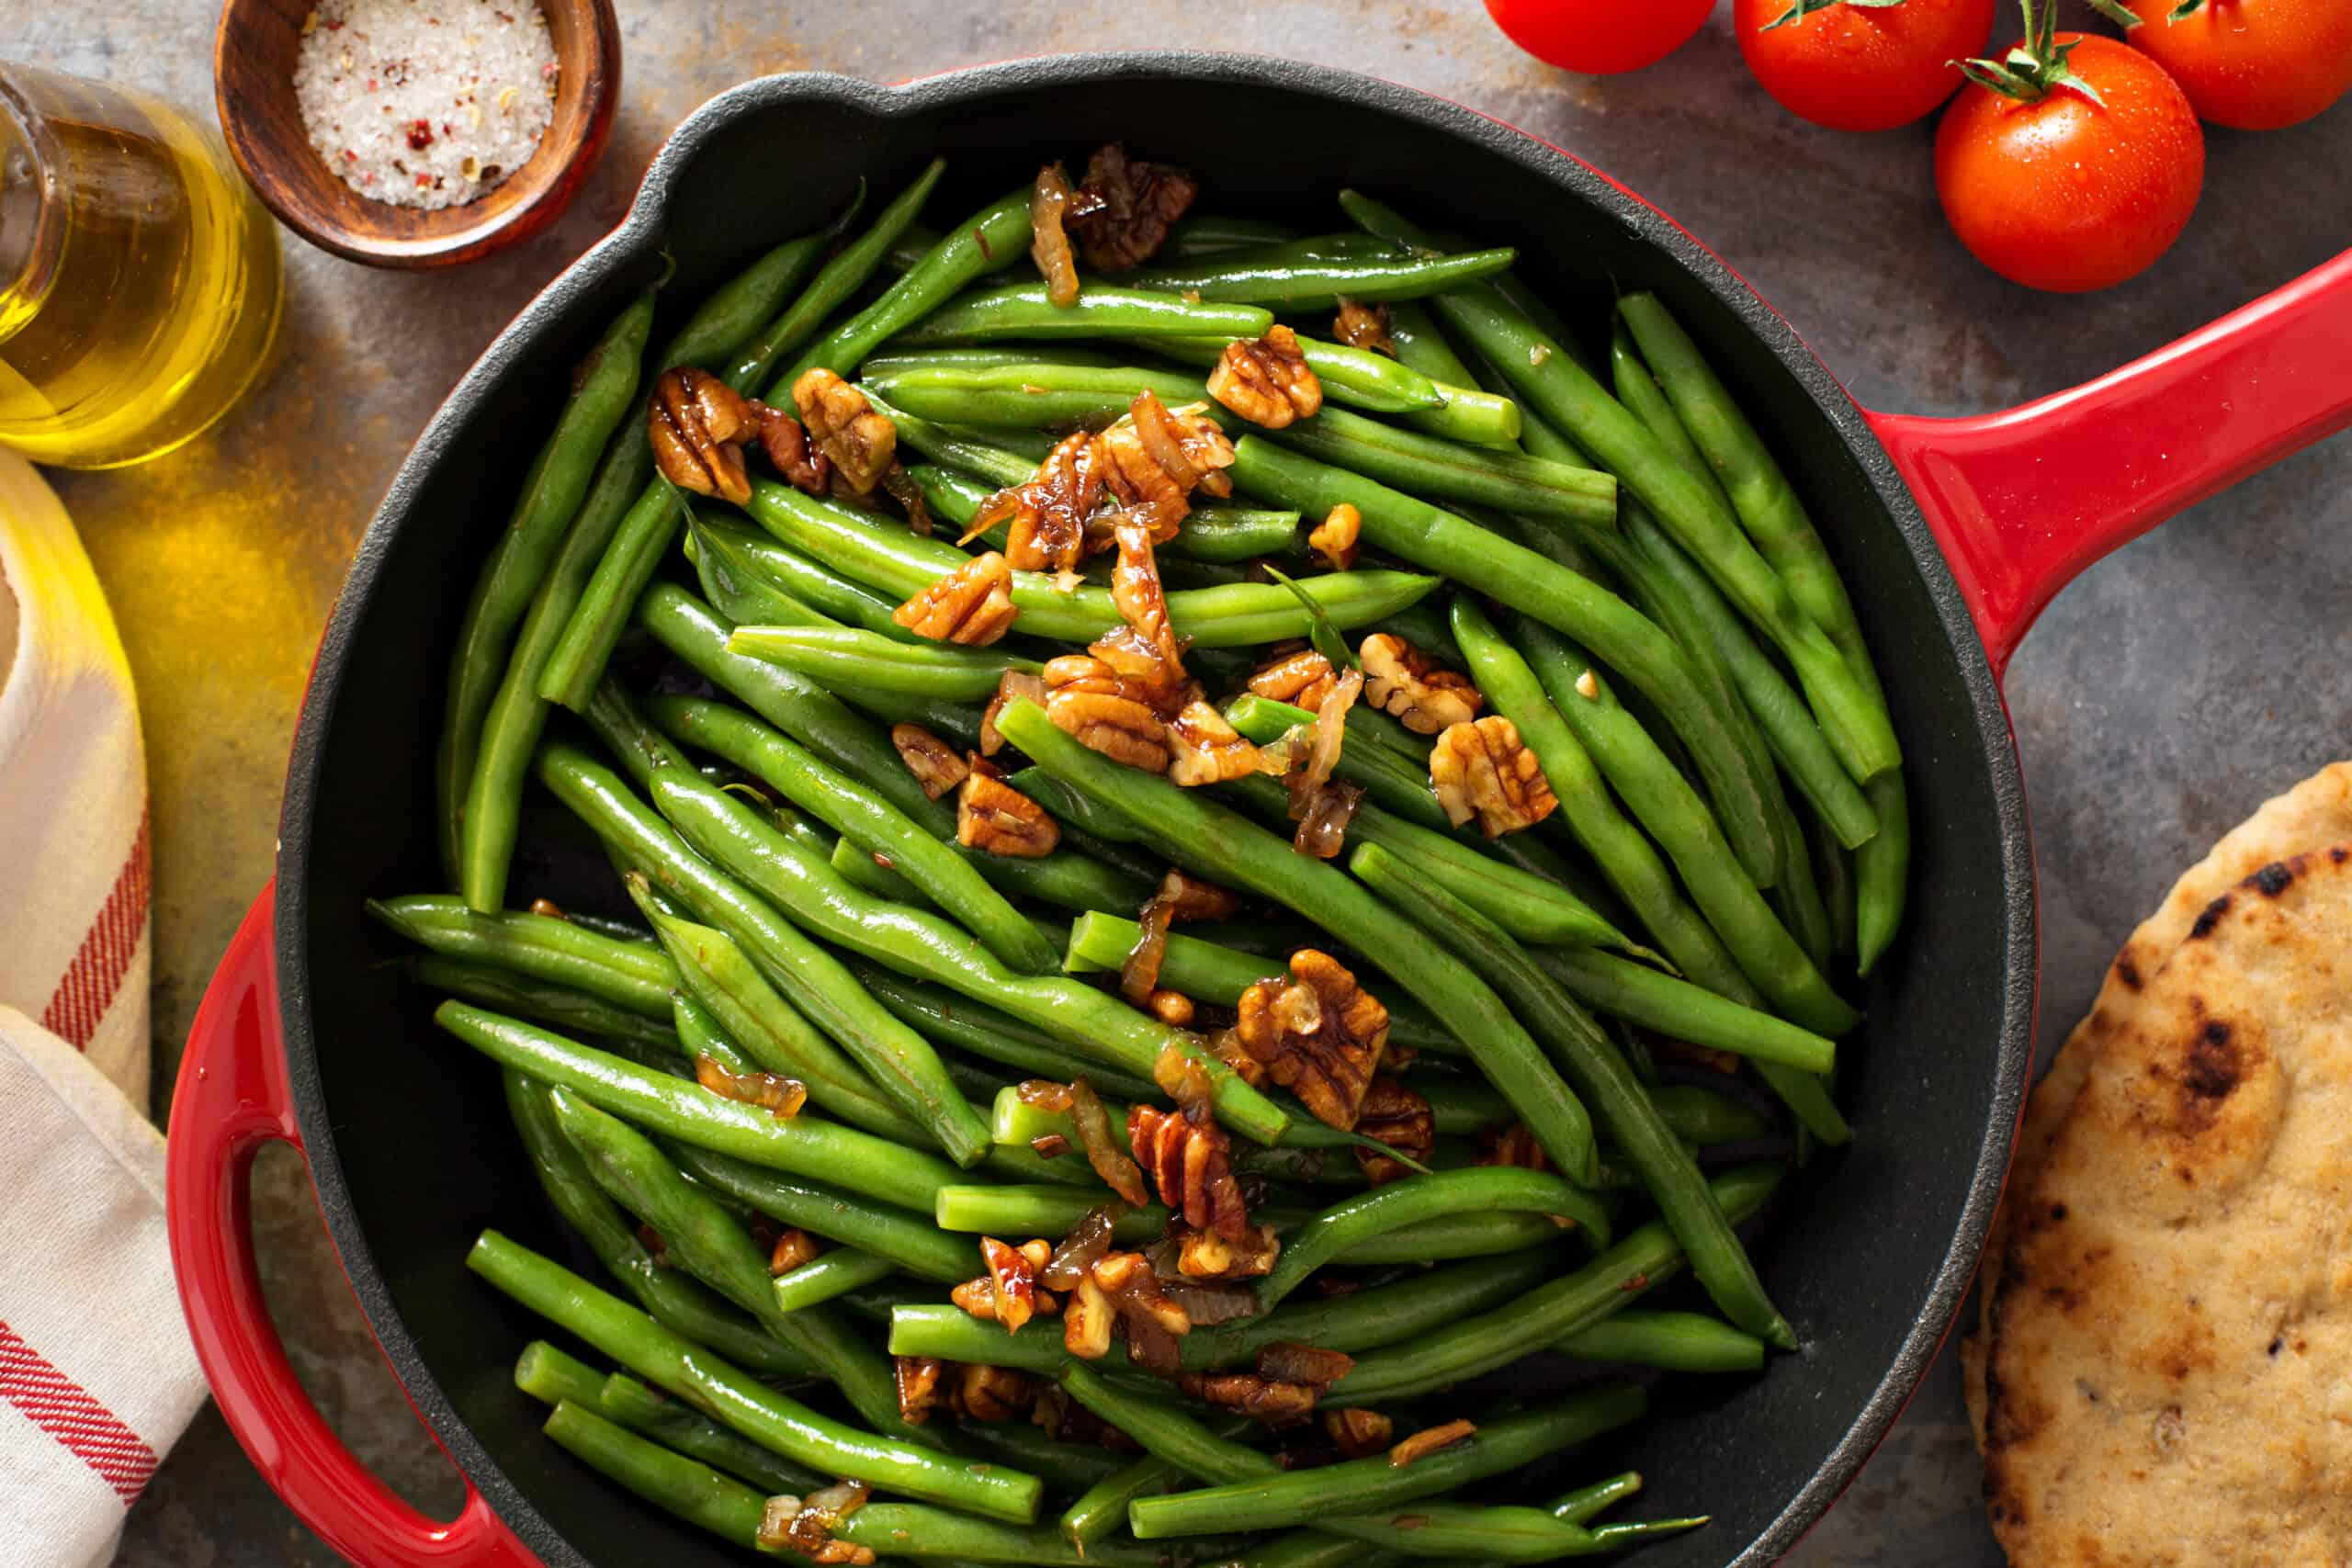 Five Ways to Quick Cook and Serve Snap Beans - Harvest to Table